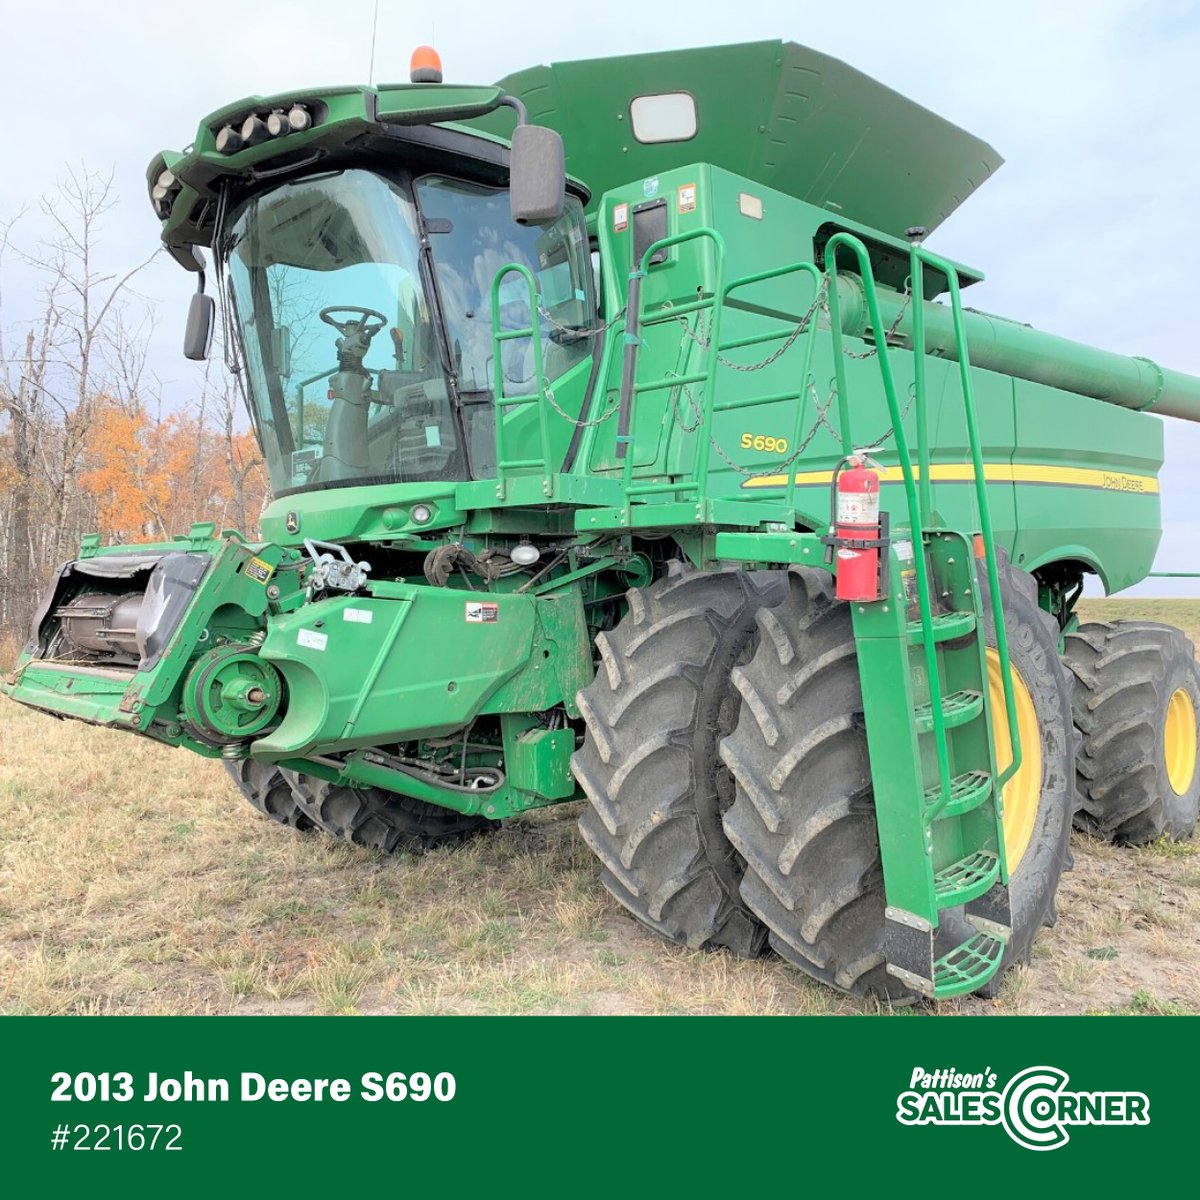 ⭐ Sales Corner ⭐ Shop our variety of pre-owned equipment in our sales corner! Shop Here: ow.ly/rPe450RnosO #PattisonAg